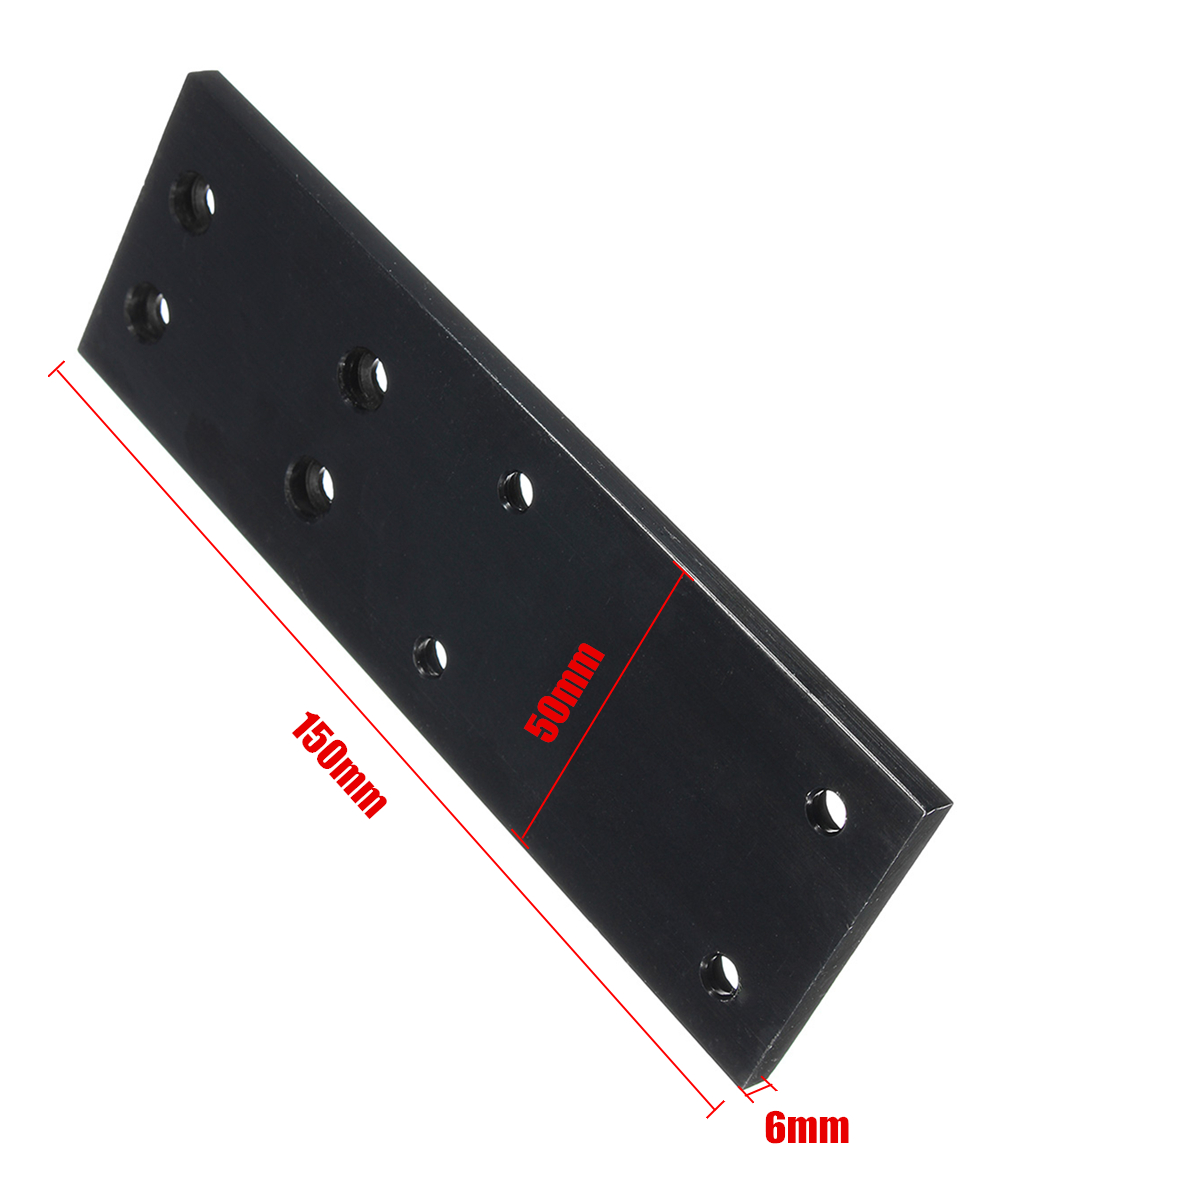 150506mm-Motor-Slide-Connection-Plate-Electric-Linear-Sliding-Table-XY-Axis-Pinboard-Board-1297972-1